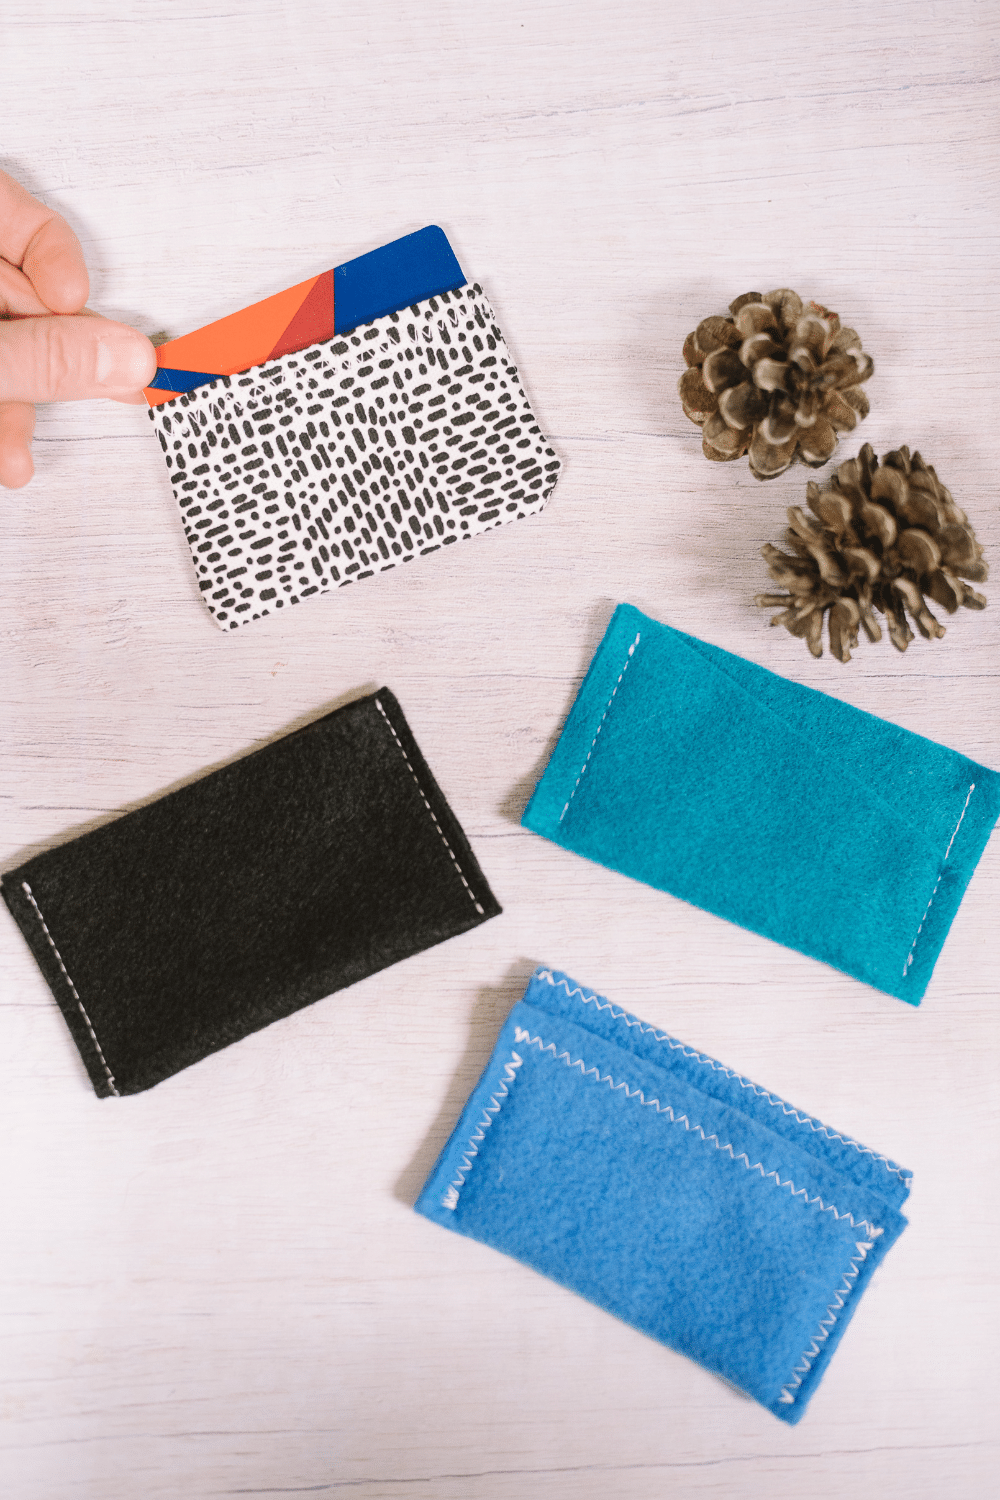 How to Sew Gift Card Pouches